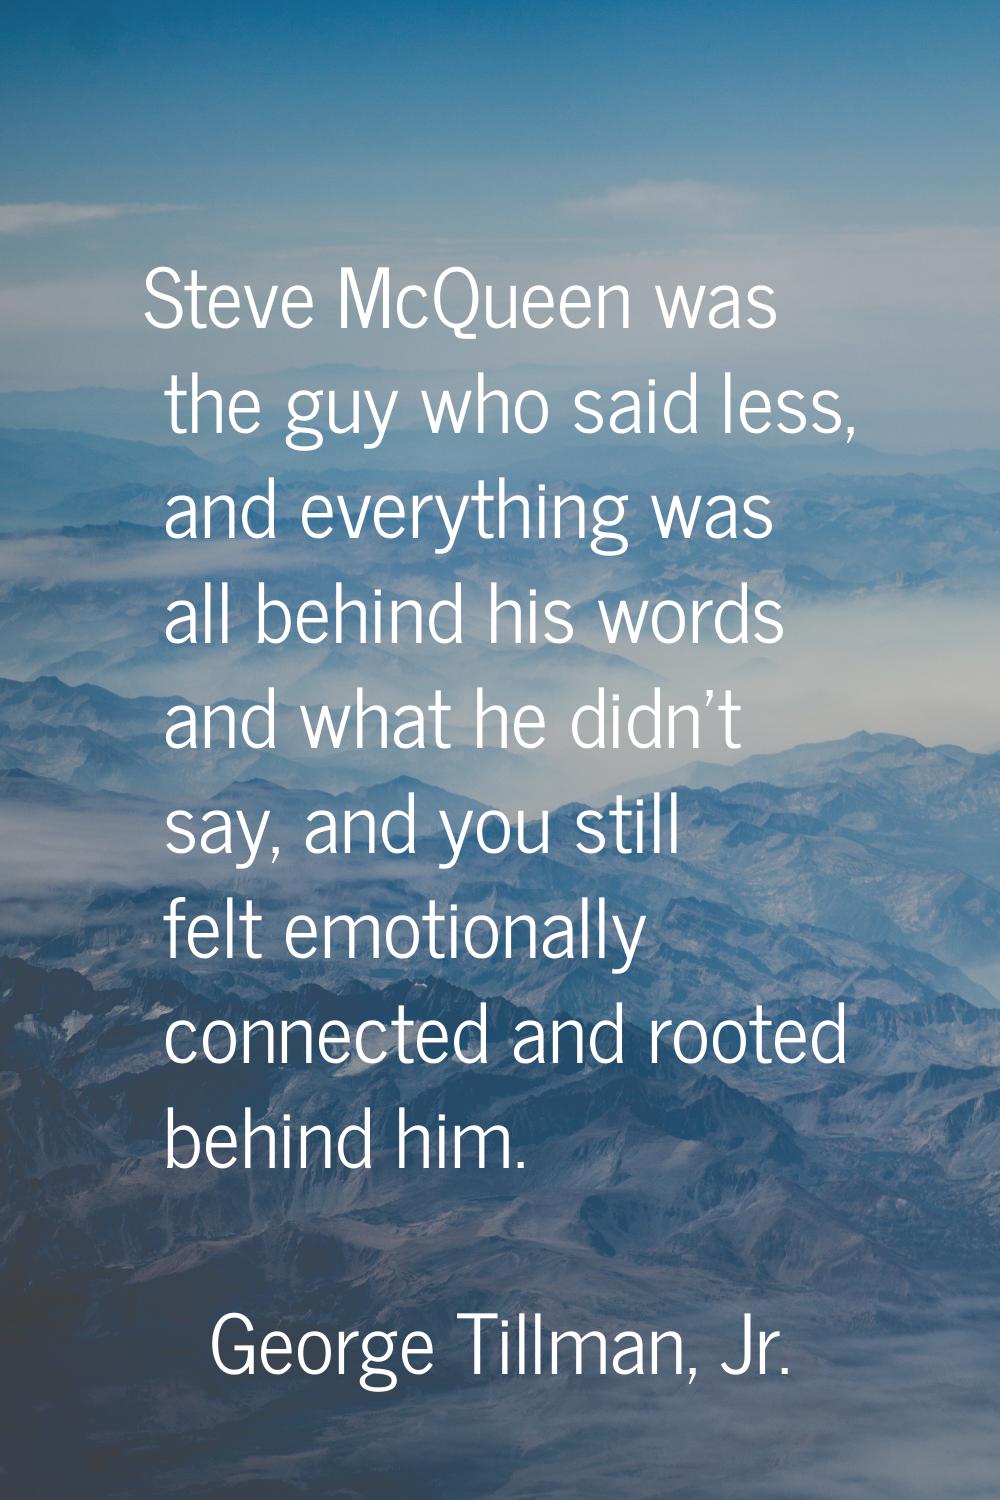 Steve McQueen was the guy who said less, and everything was all behind his words and what he didn't